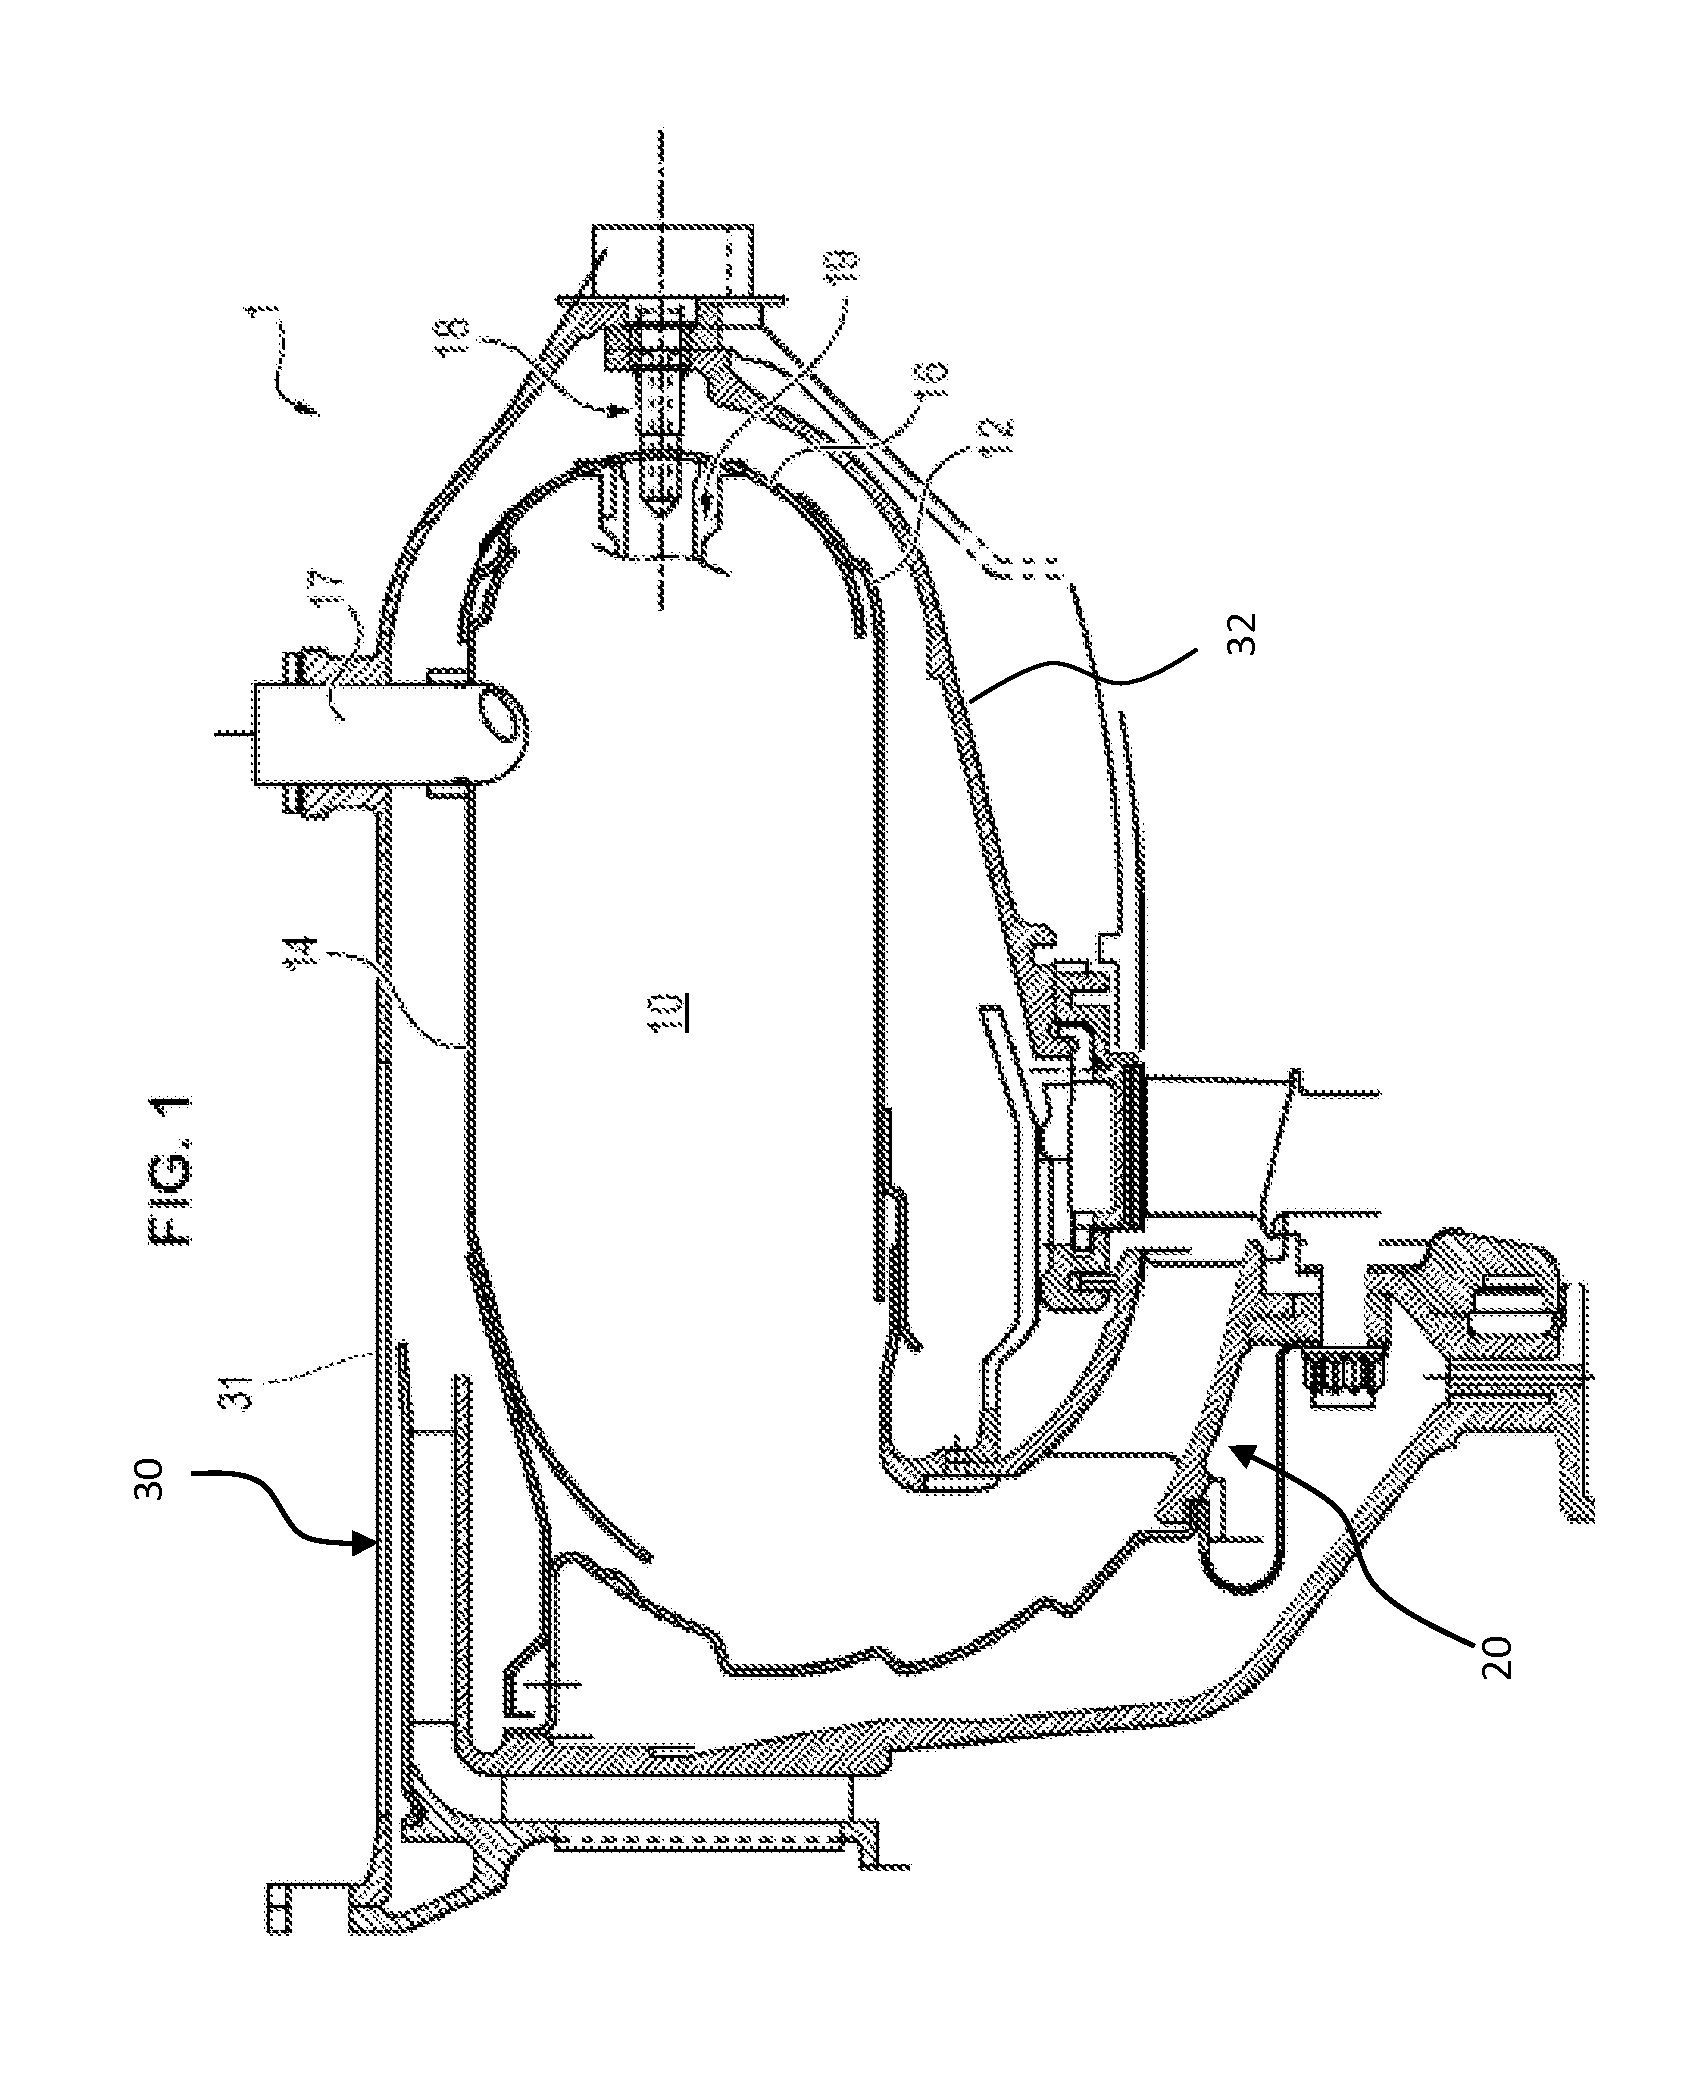 Turbo machine combustion assembly comprising an improved fuel supply circuit